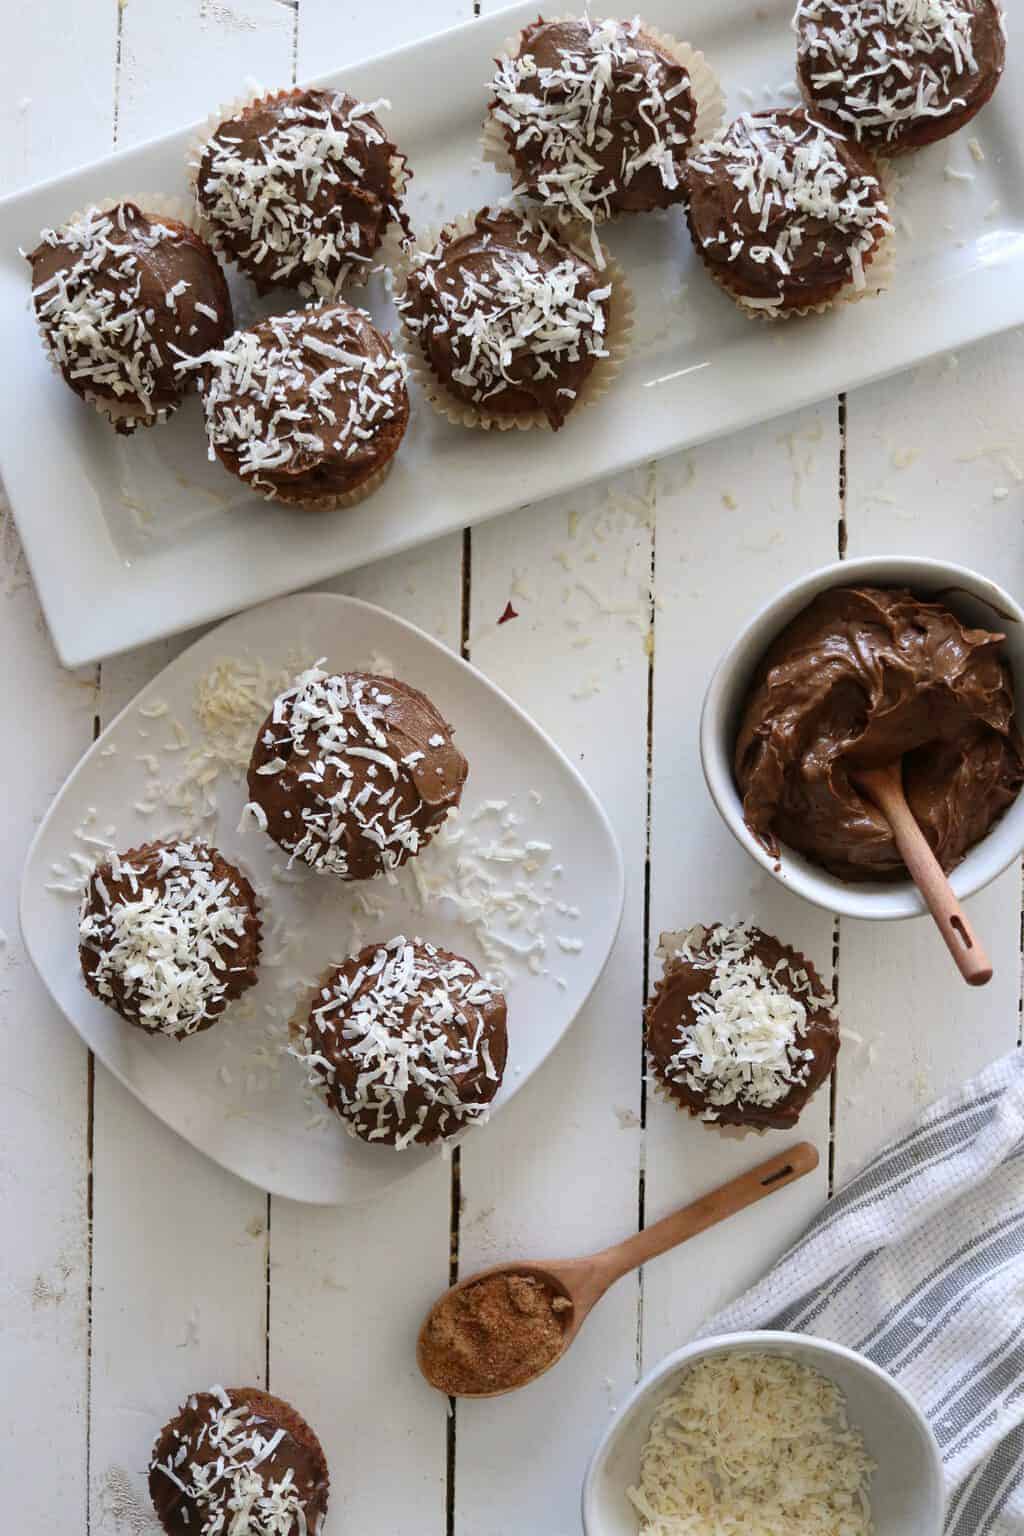 Cupcakes with chocolate frosting and coconut shreds on white plate.